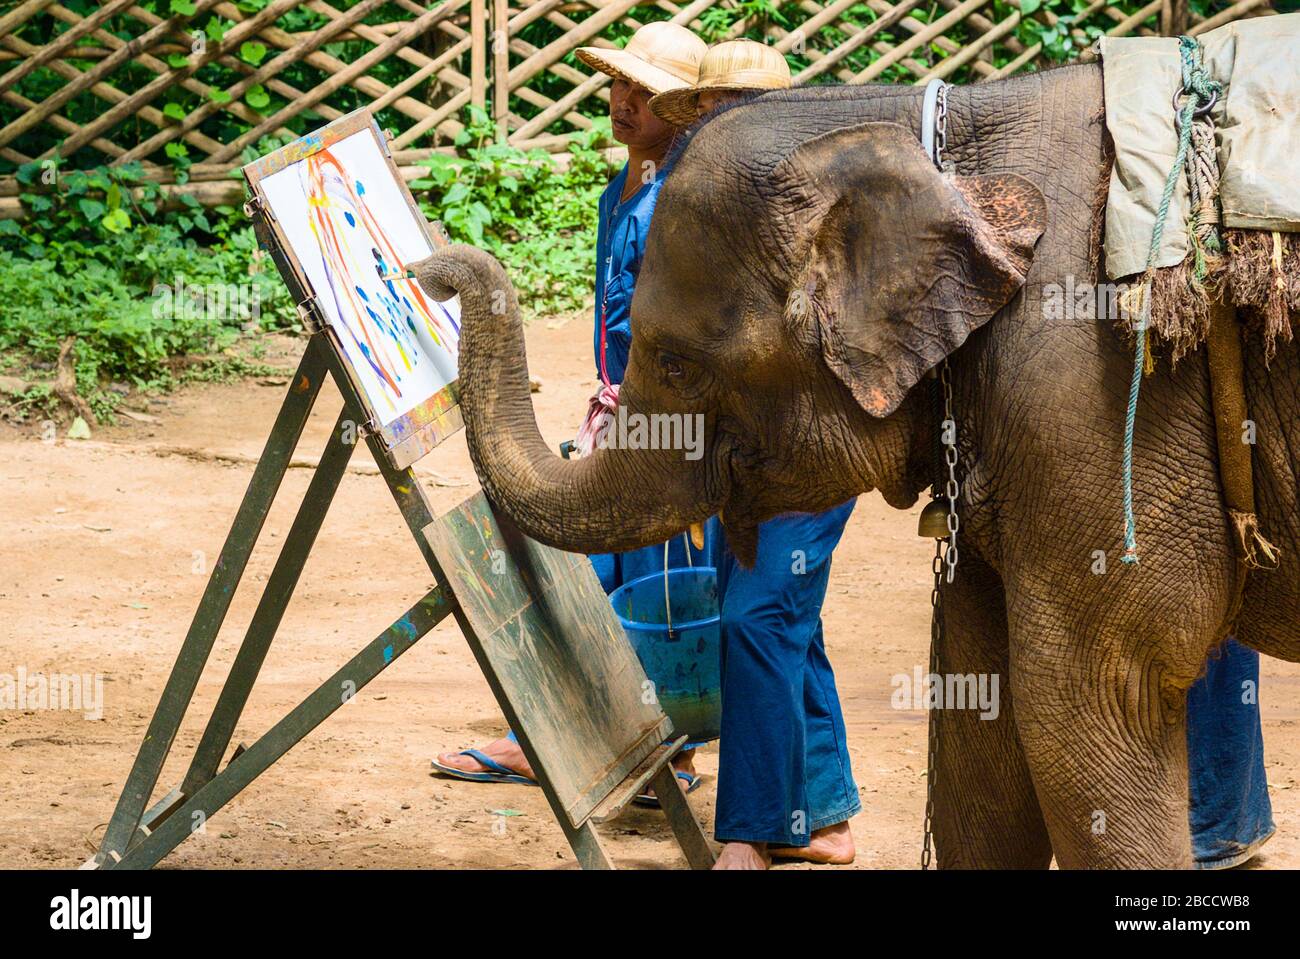 The Elephant Training Center Chiang Dao, founded in 1969. The Center has one of the most beautiful natural settings in Chiang Mai, Thailand Stock Photo